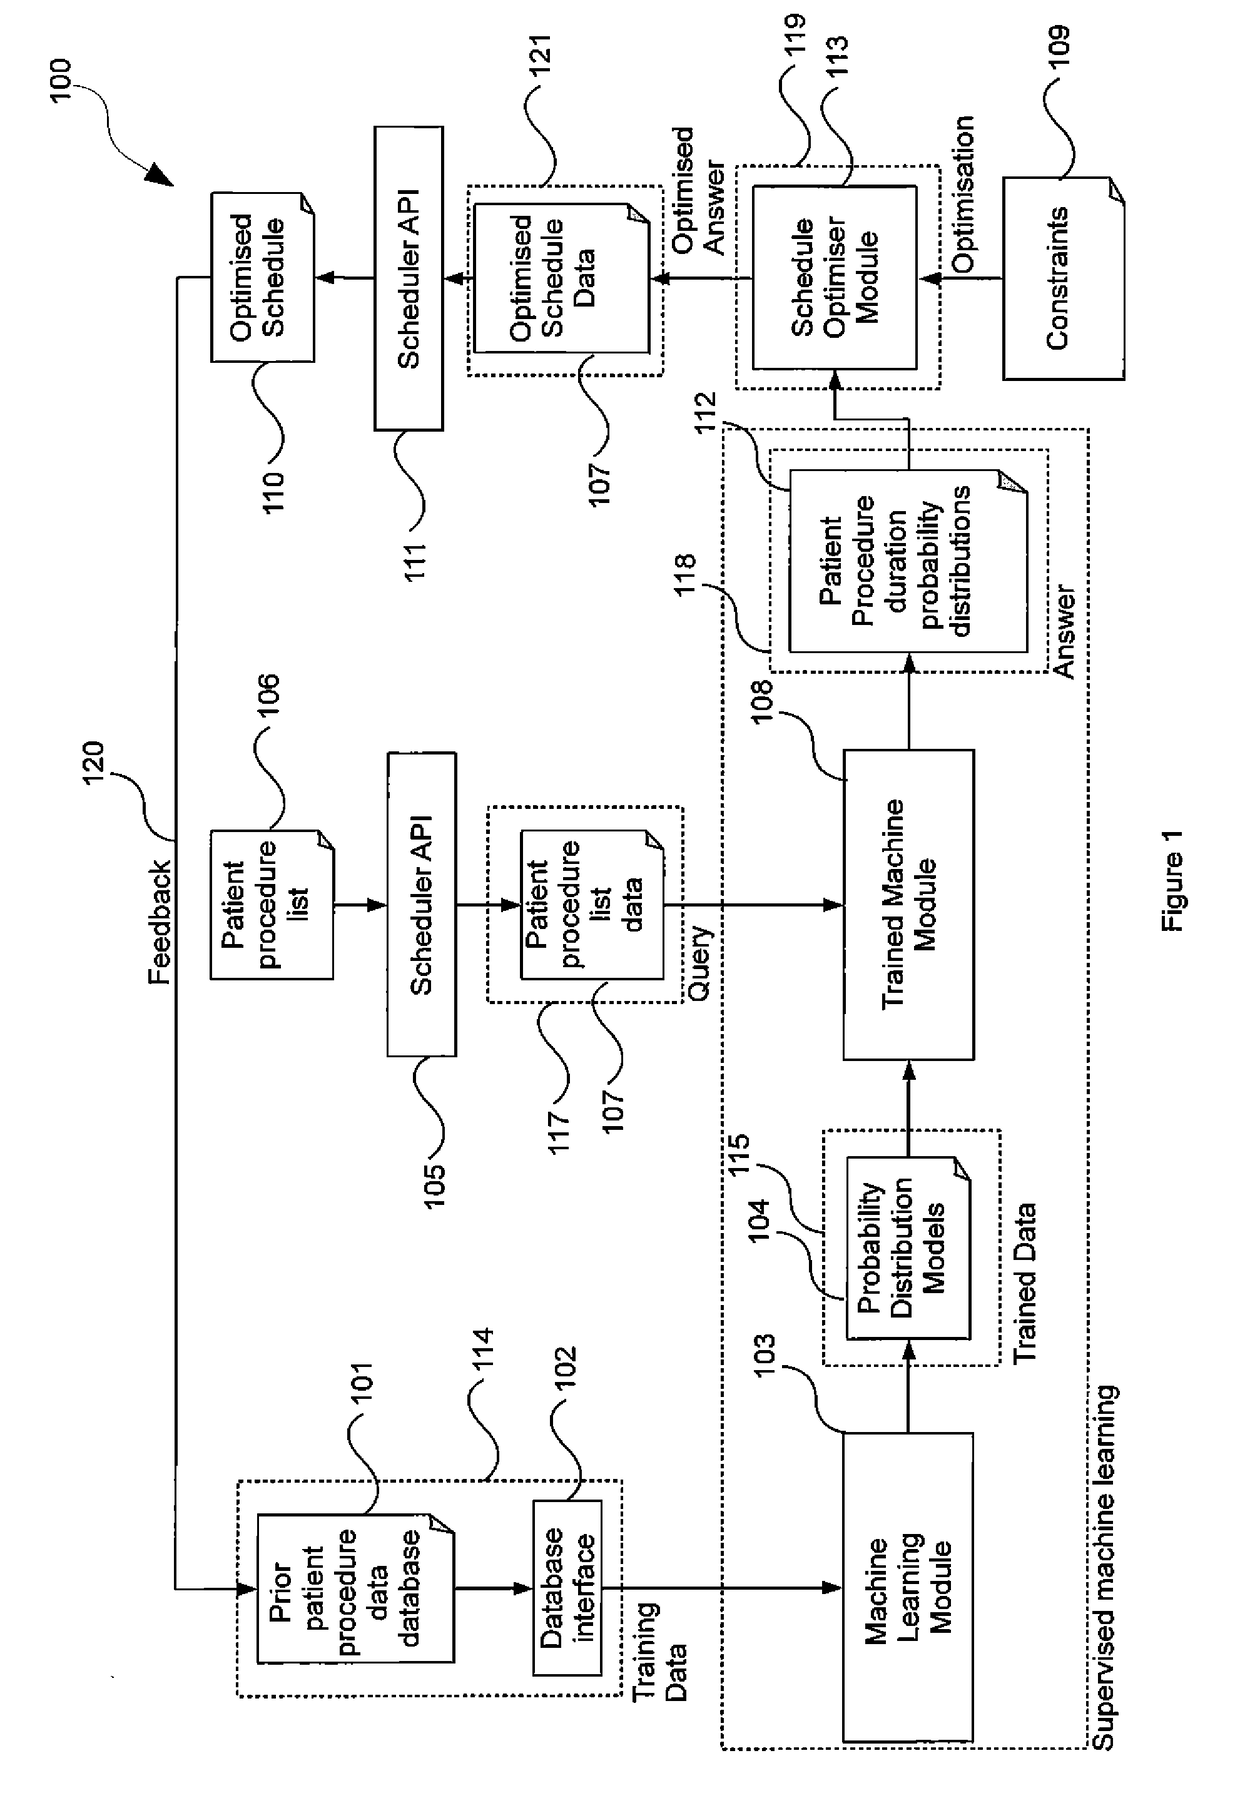 A patient procedure schedule throughput optimiser supervised machine learning system